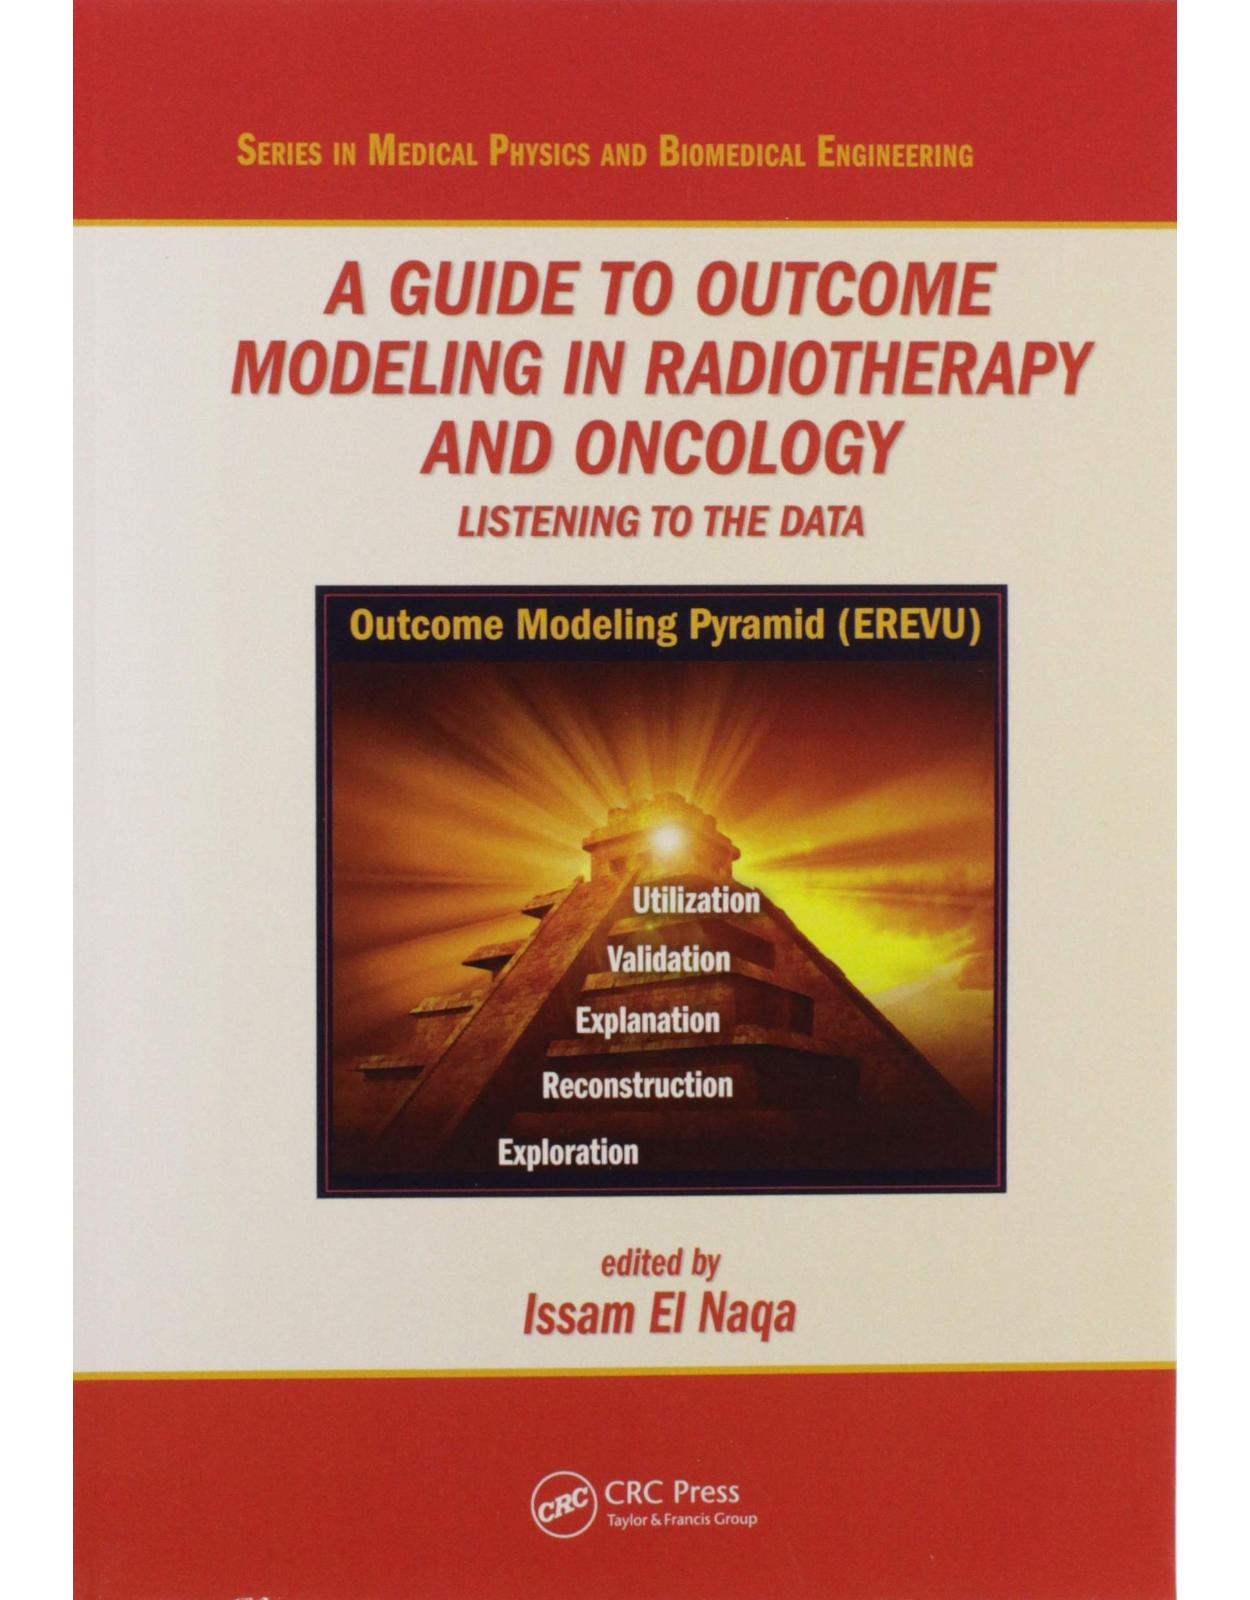 A Guide to Outcome Modeling In Radiotherapy and Oncology. Listening to the Data